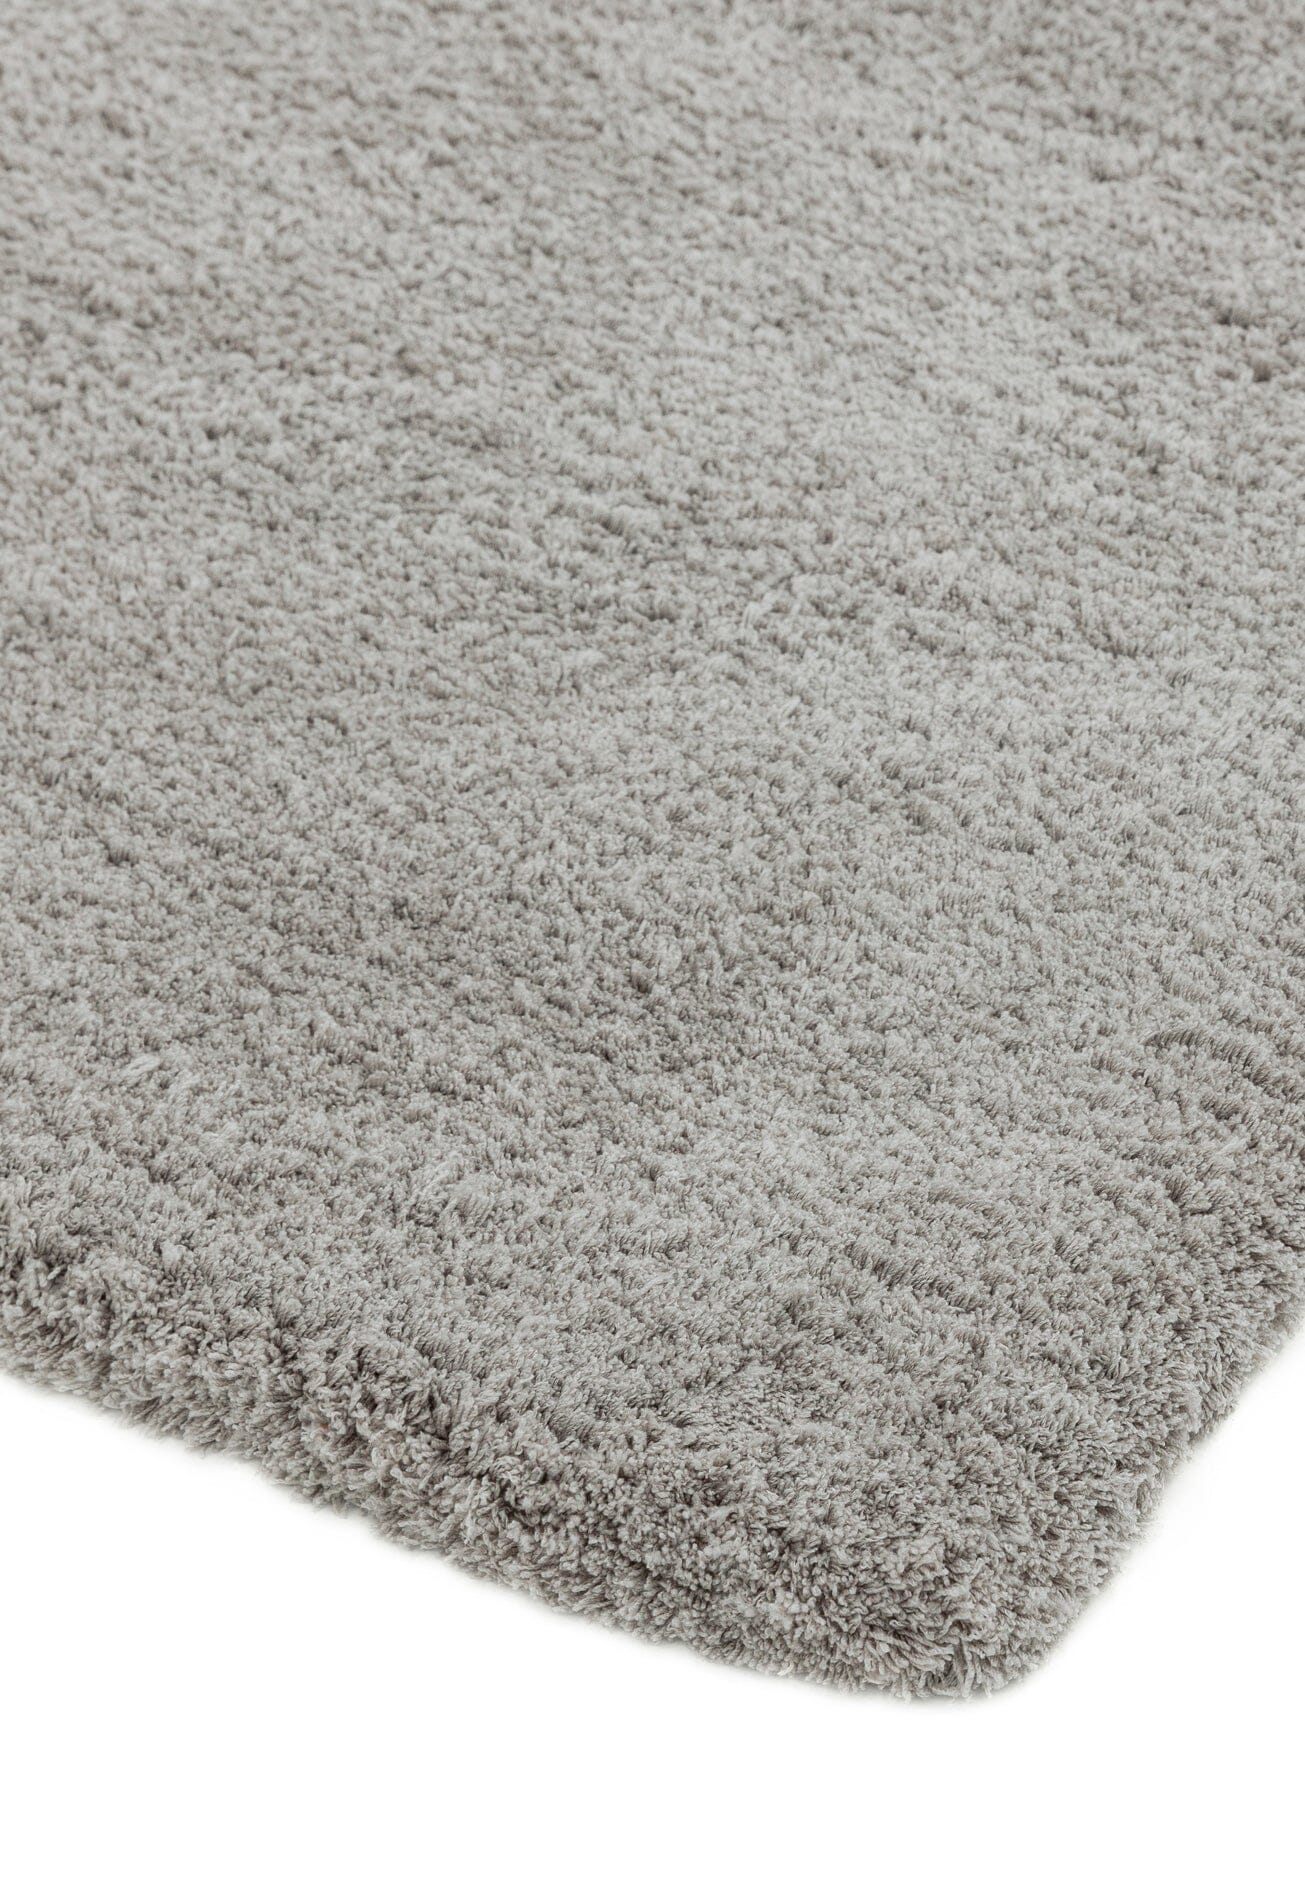  Asiatic Carpets-Asiatic Carpets Lulu Soft Touch Table Tufted Rug Silver - 200 x 290cm-Grey, Silver 085 